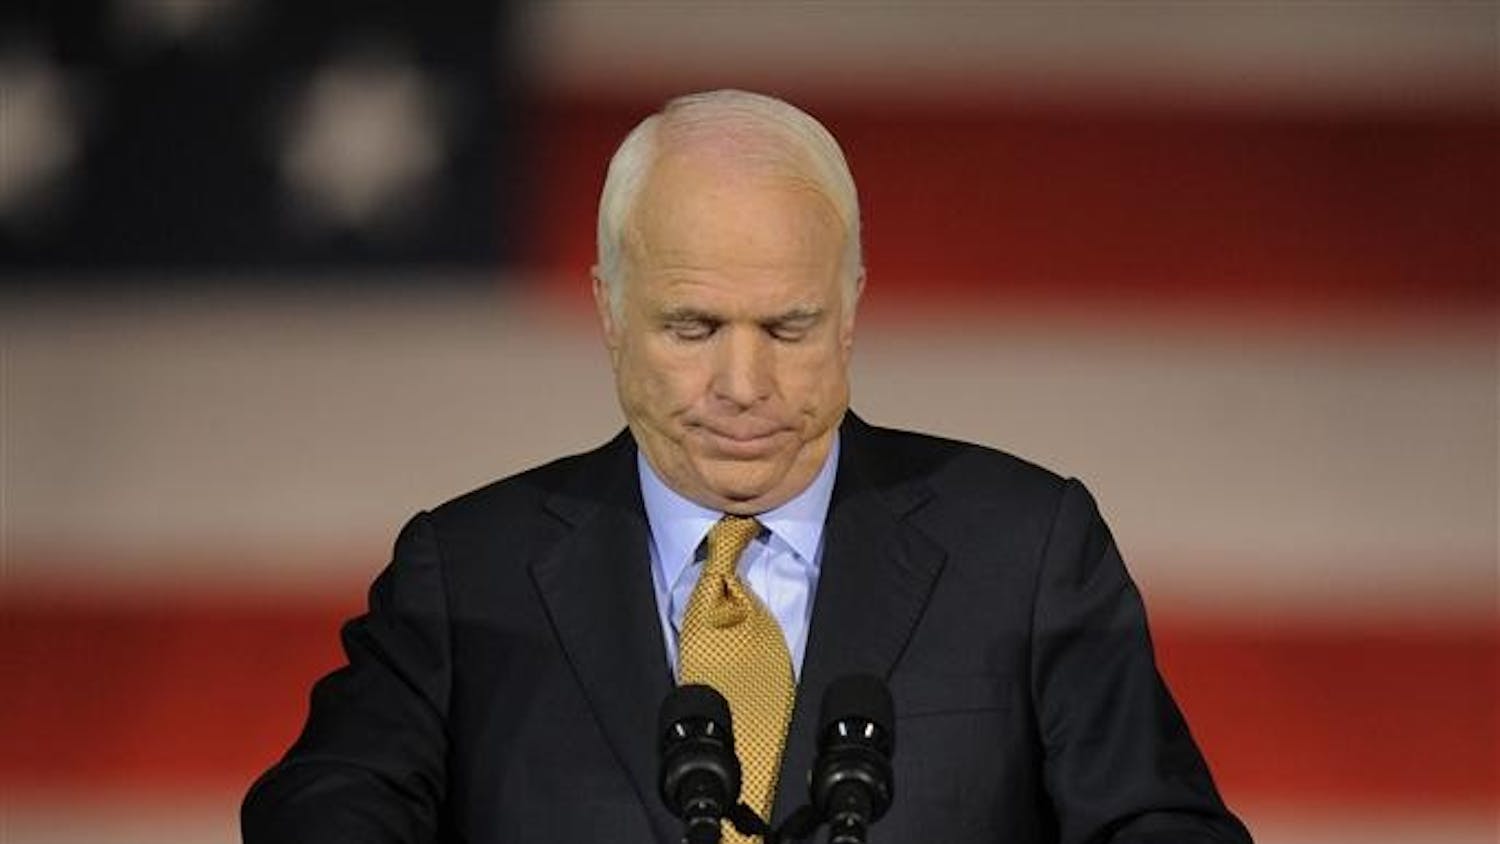 Sen. John McCain, R-Ariz., delivers remarks during an election night rally on Tuesday in Phoenix.